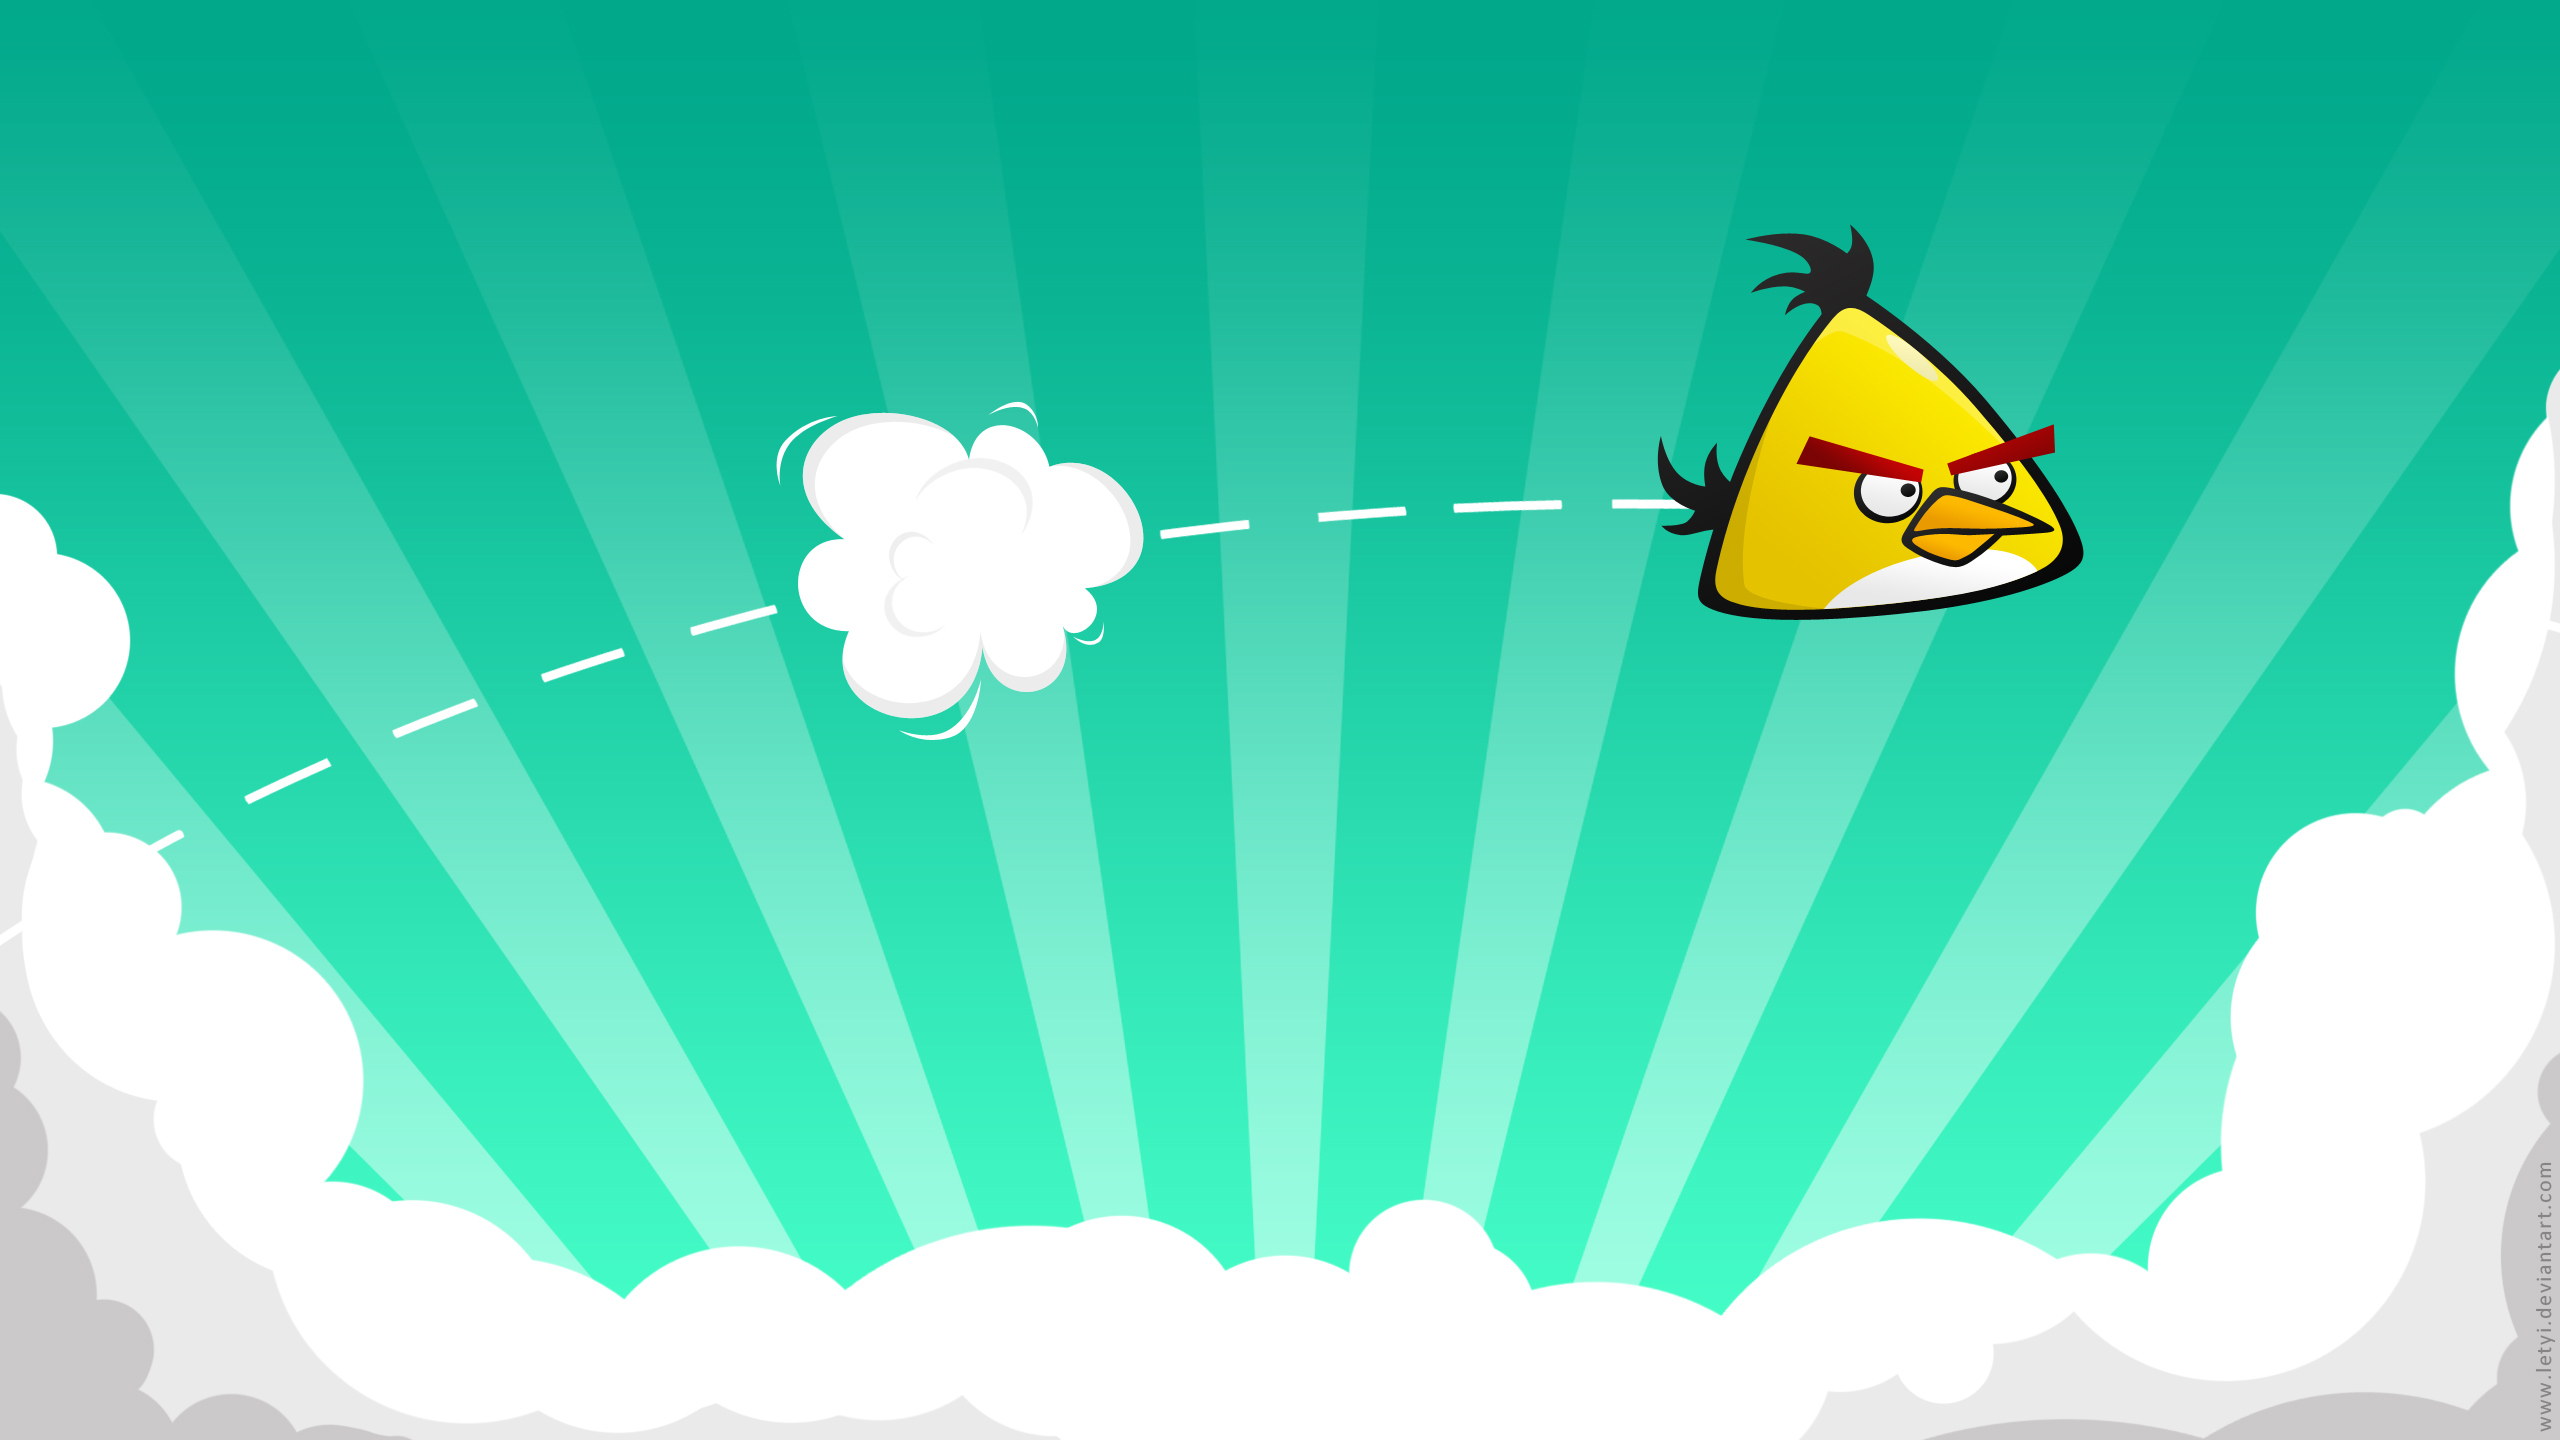 Wallpapers Invitation Cards Angry Birds Hd P 2560x1440 | #569161 ...